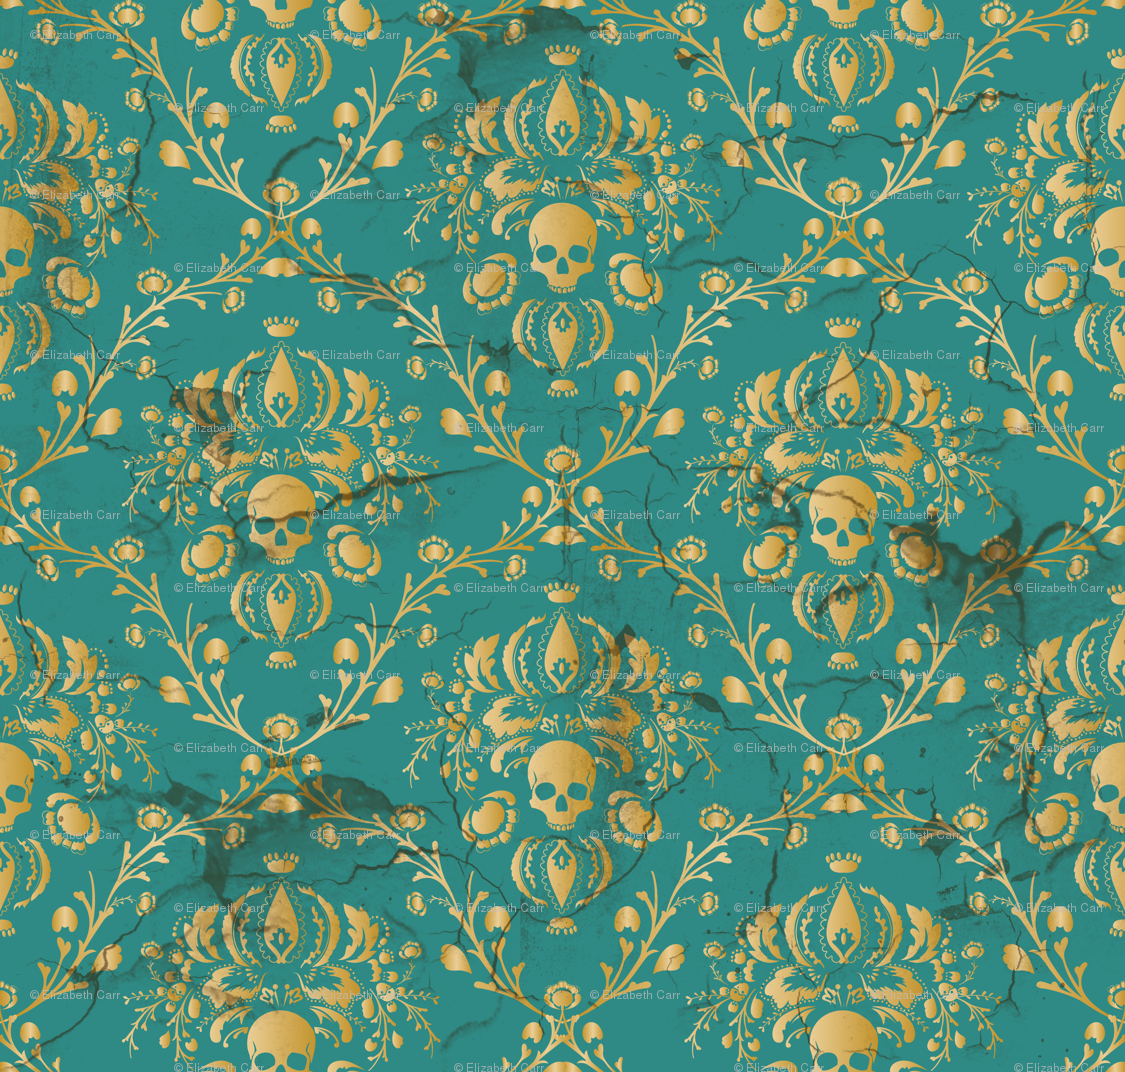 elizabeth's shop on Spoonflower: fabric, wallpaper and gift wrap